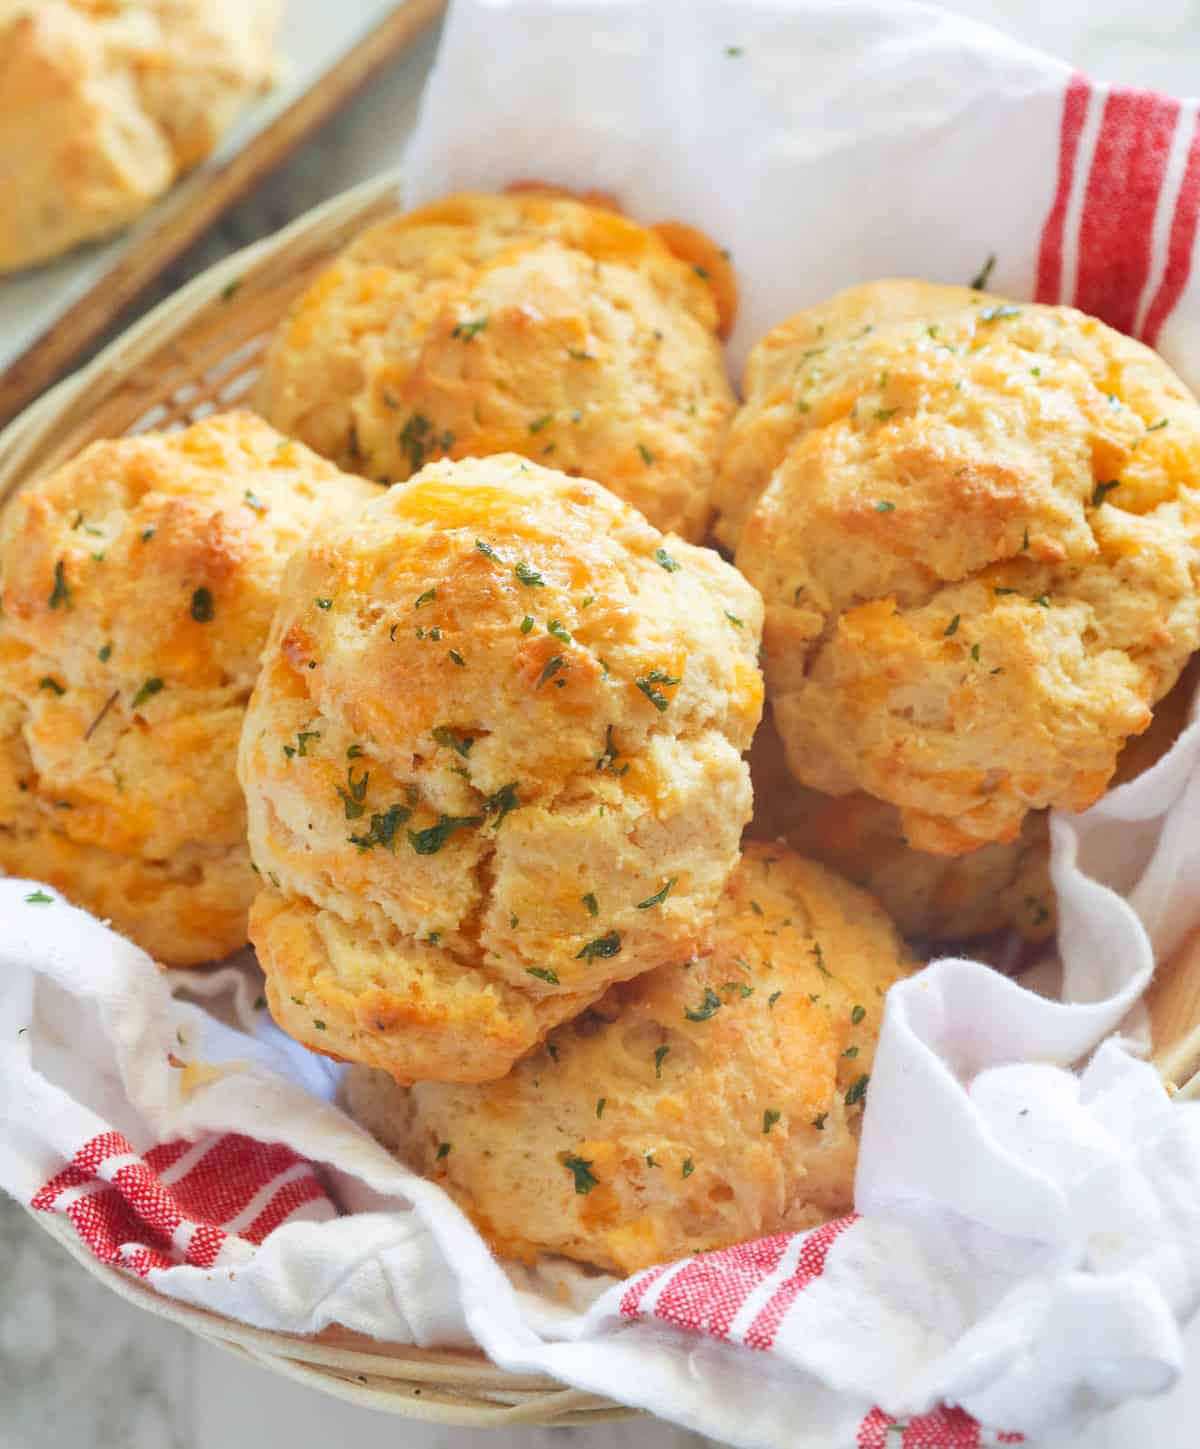 Homemade Red Lobster Biscuits [Cheddar Bay Biscuits]